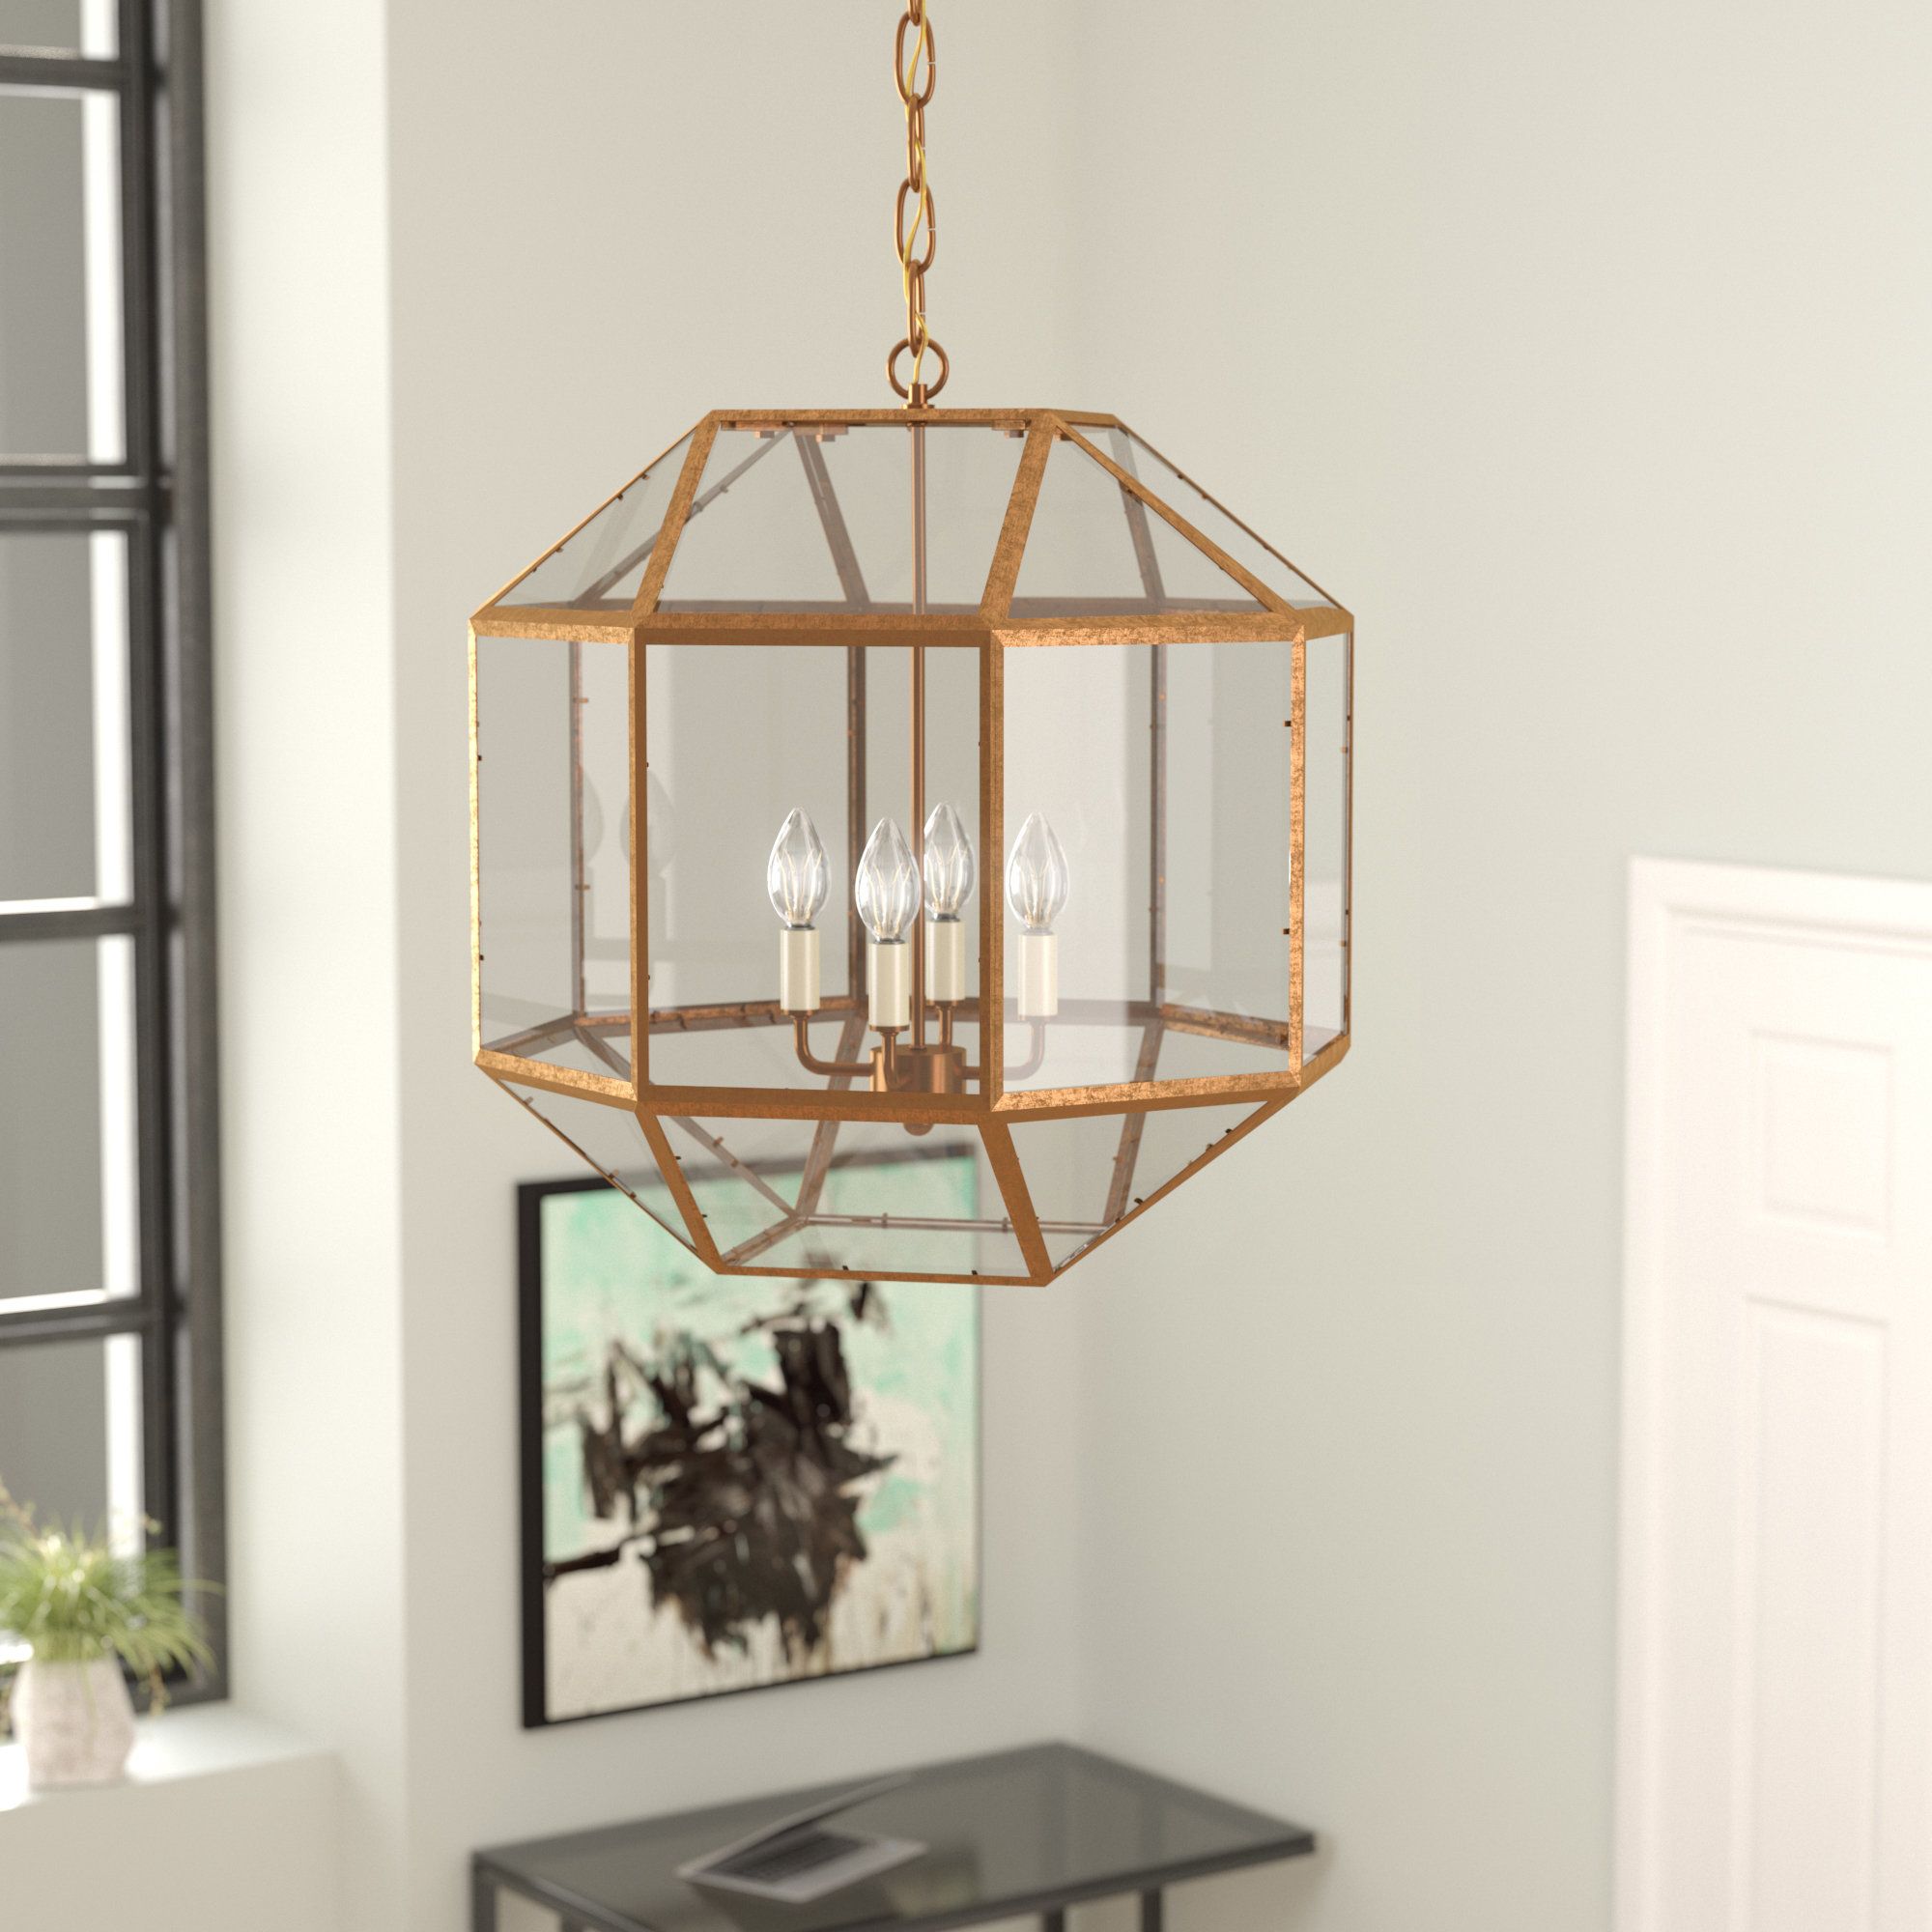 Geometric Chandeliers Sale – Up To 65% Off Until September With Regard To Reidar 4 Light Geometric Chandeliers (View 27 of 30)